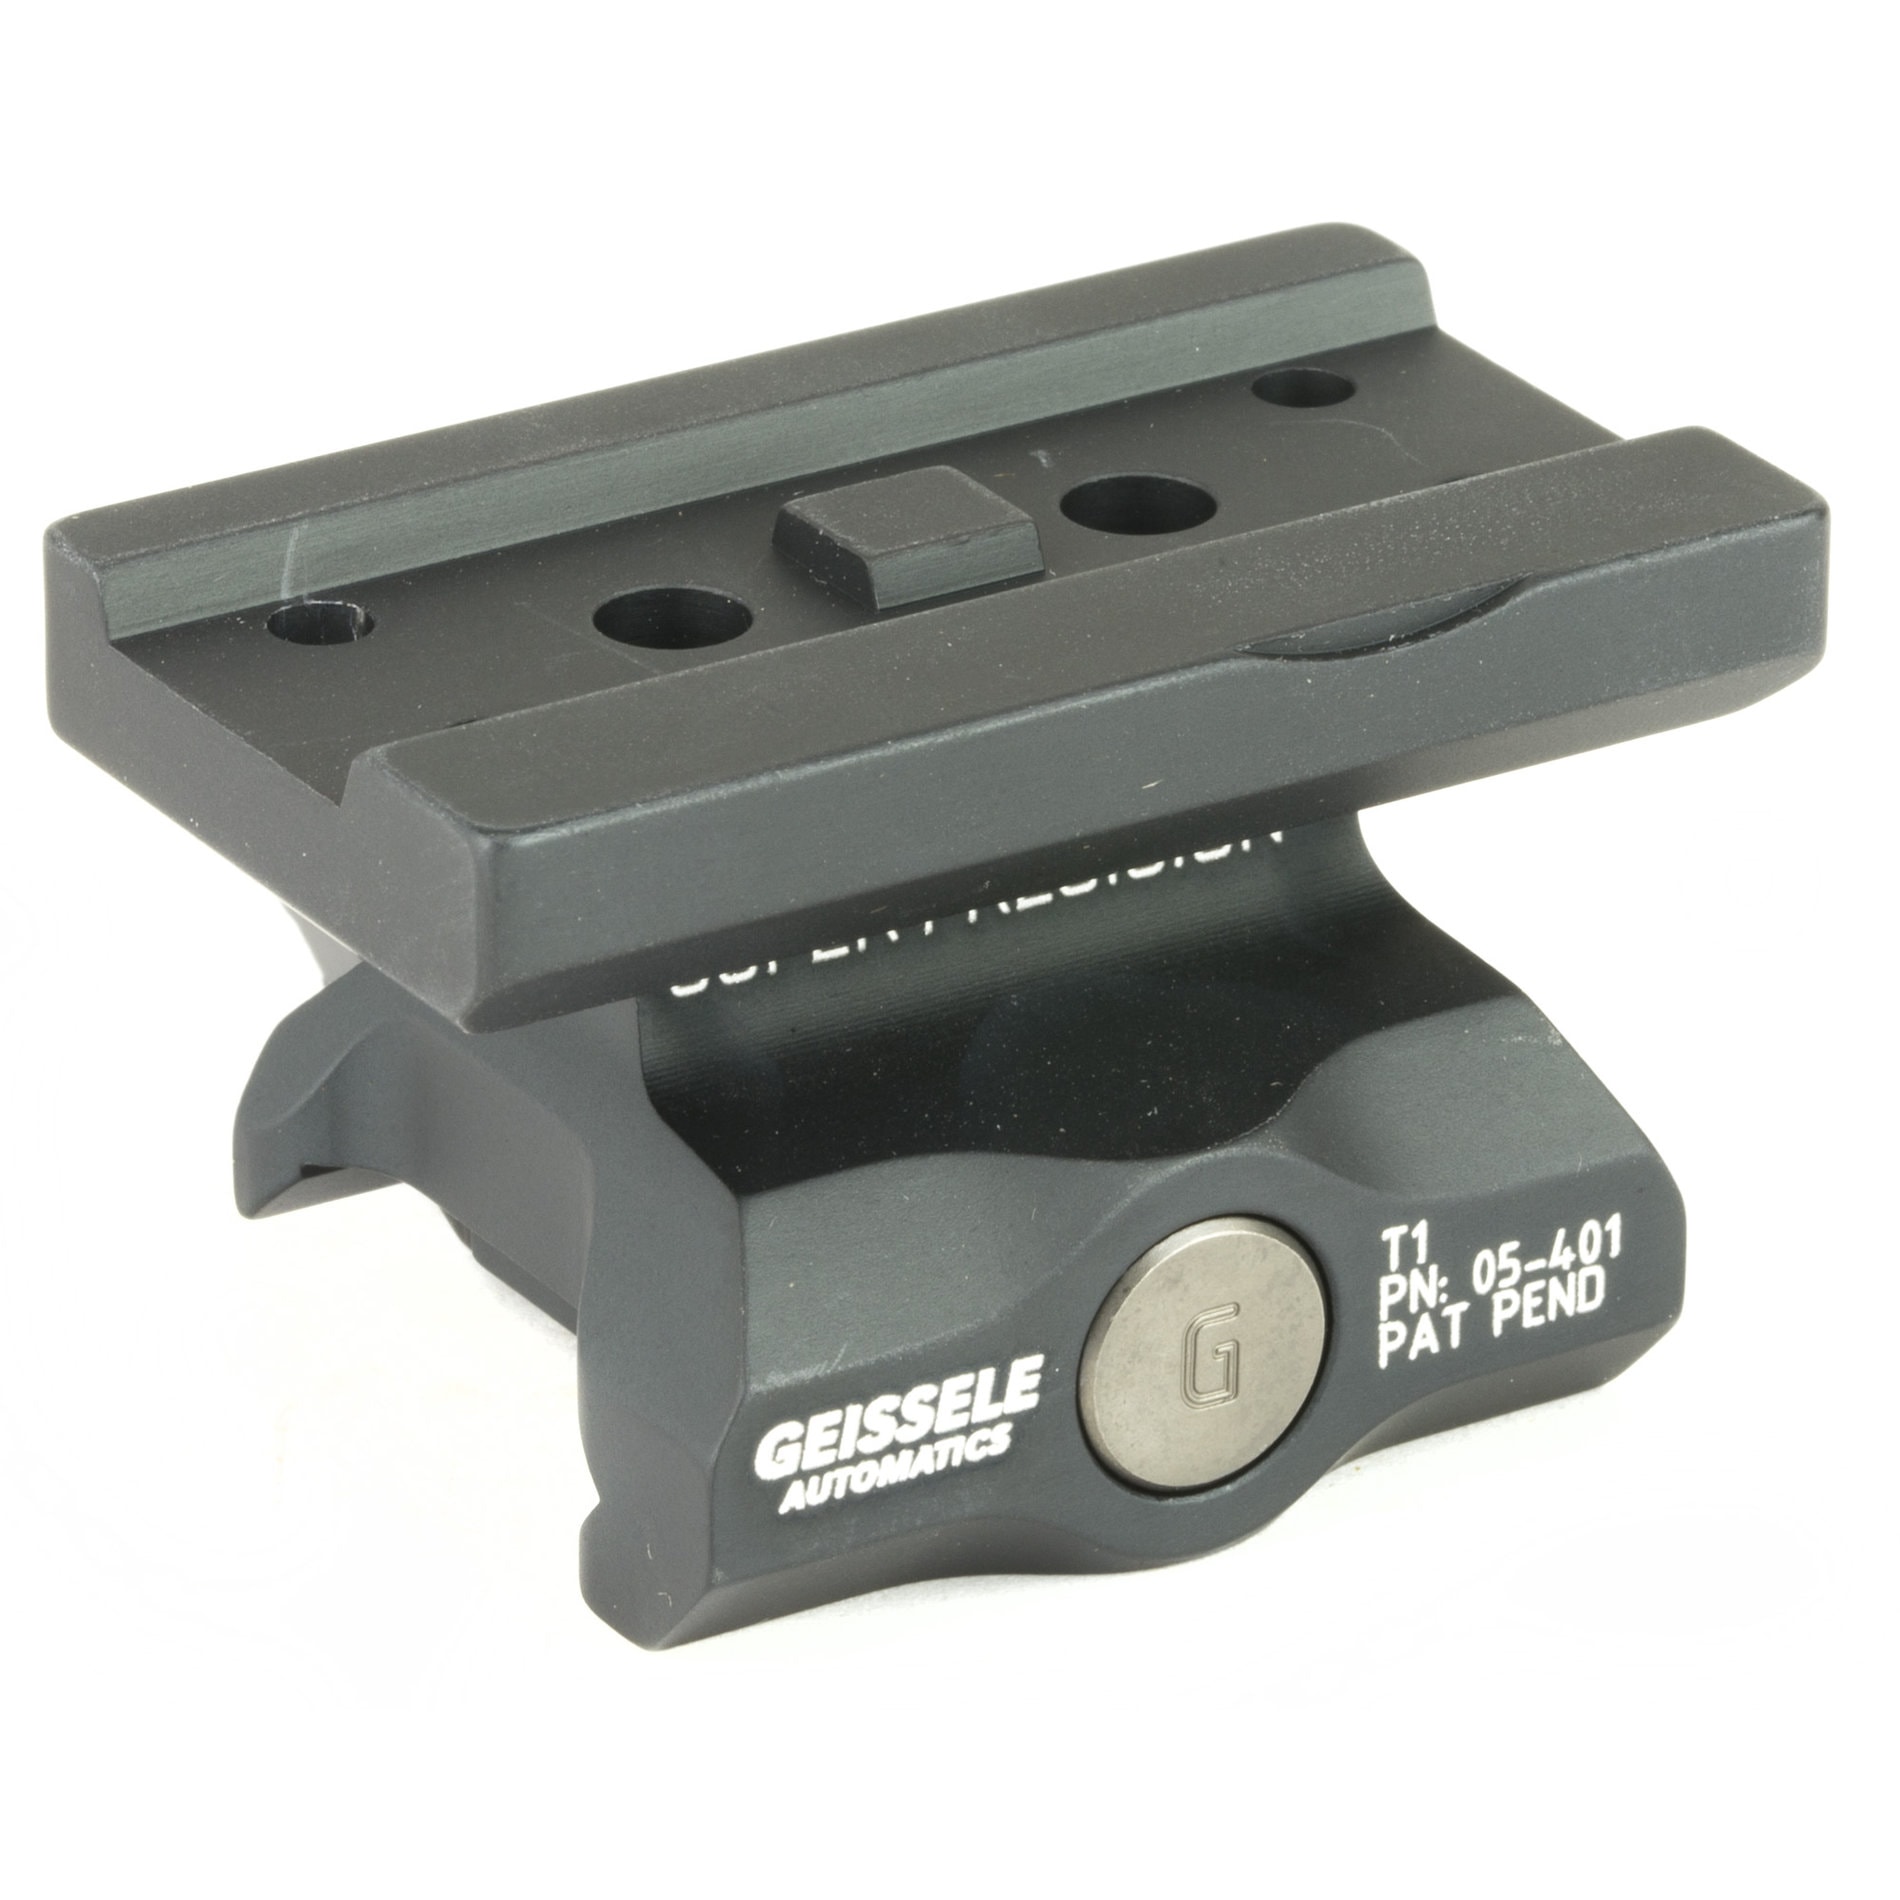 Geissele Automatics Super Precision Mount for Aimpoint T1 Pattern Red Dot Sights - AT3 Tactical